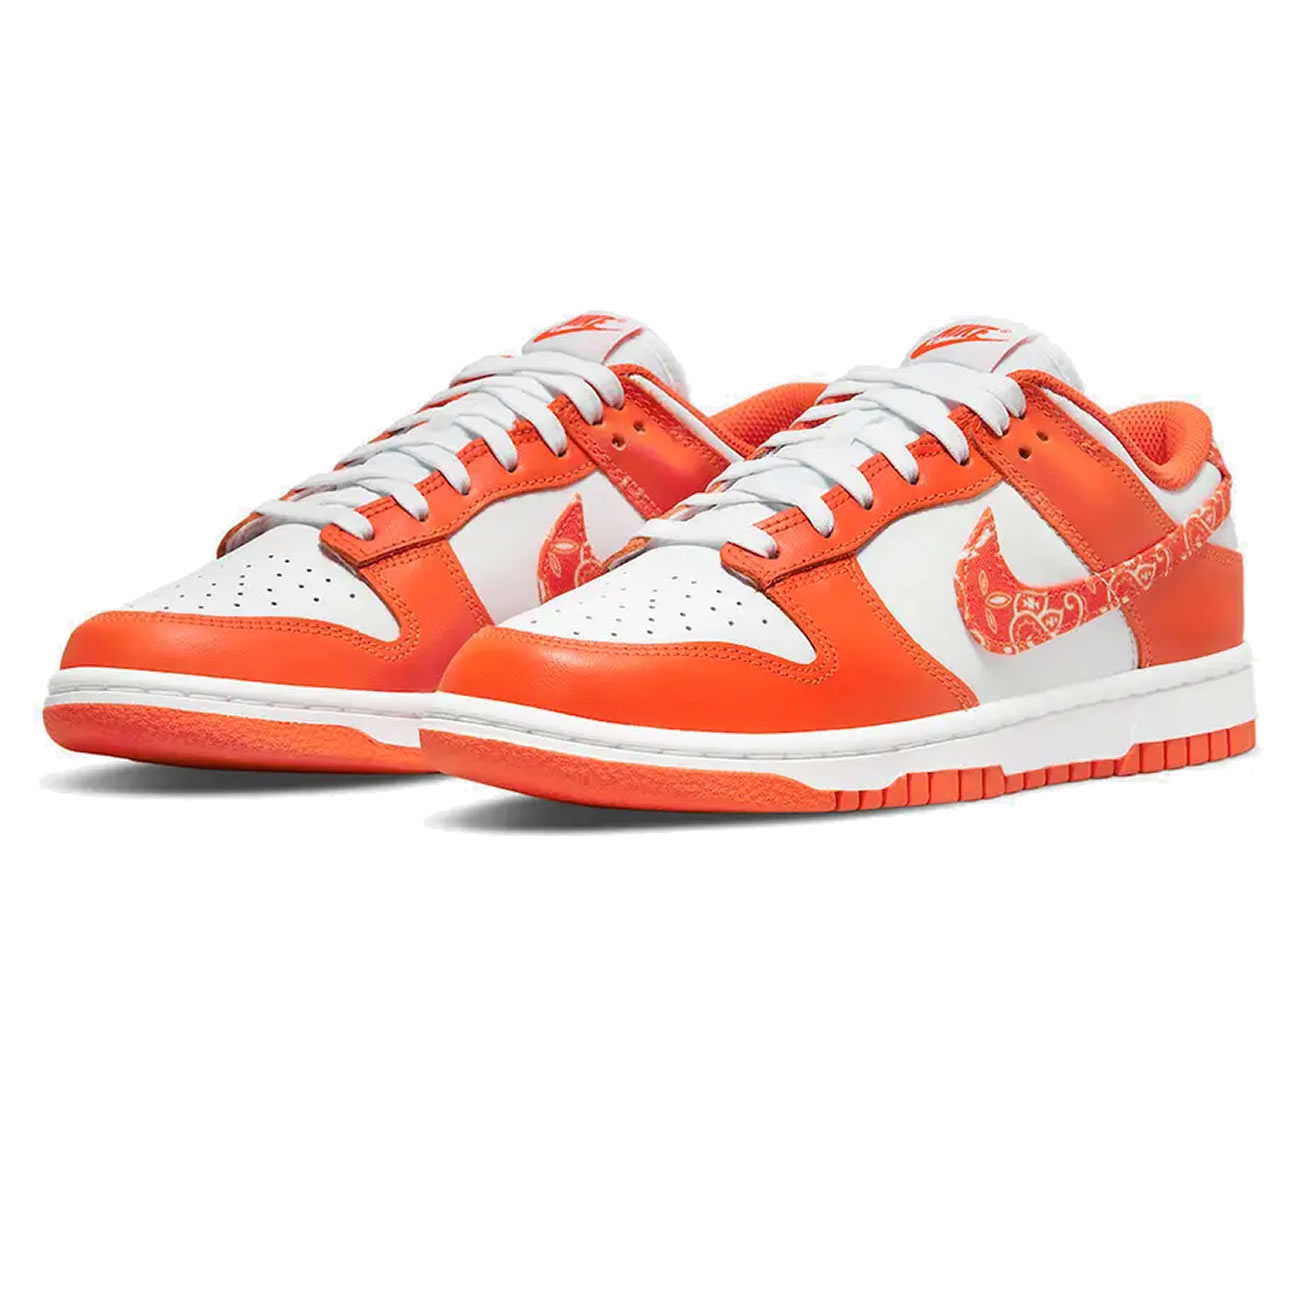 Nike Dunk Low Essential Paisley Pack Orange W Dh4401 103 (10) - newkick.org